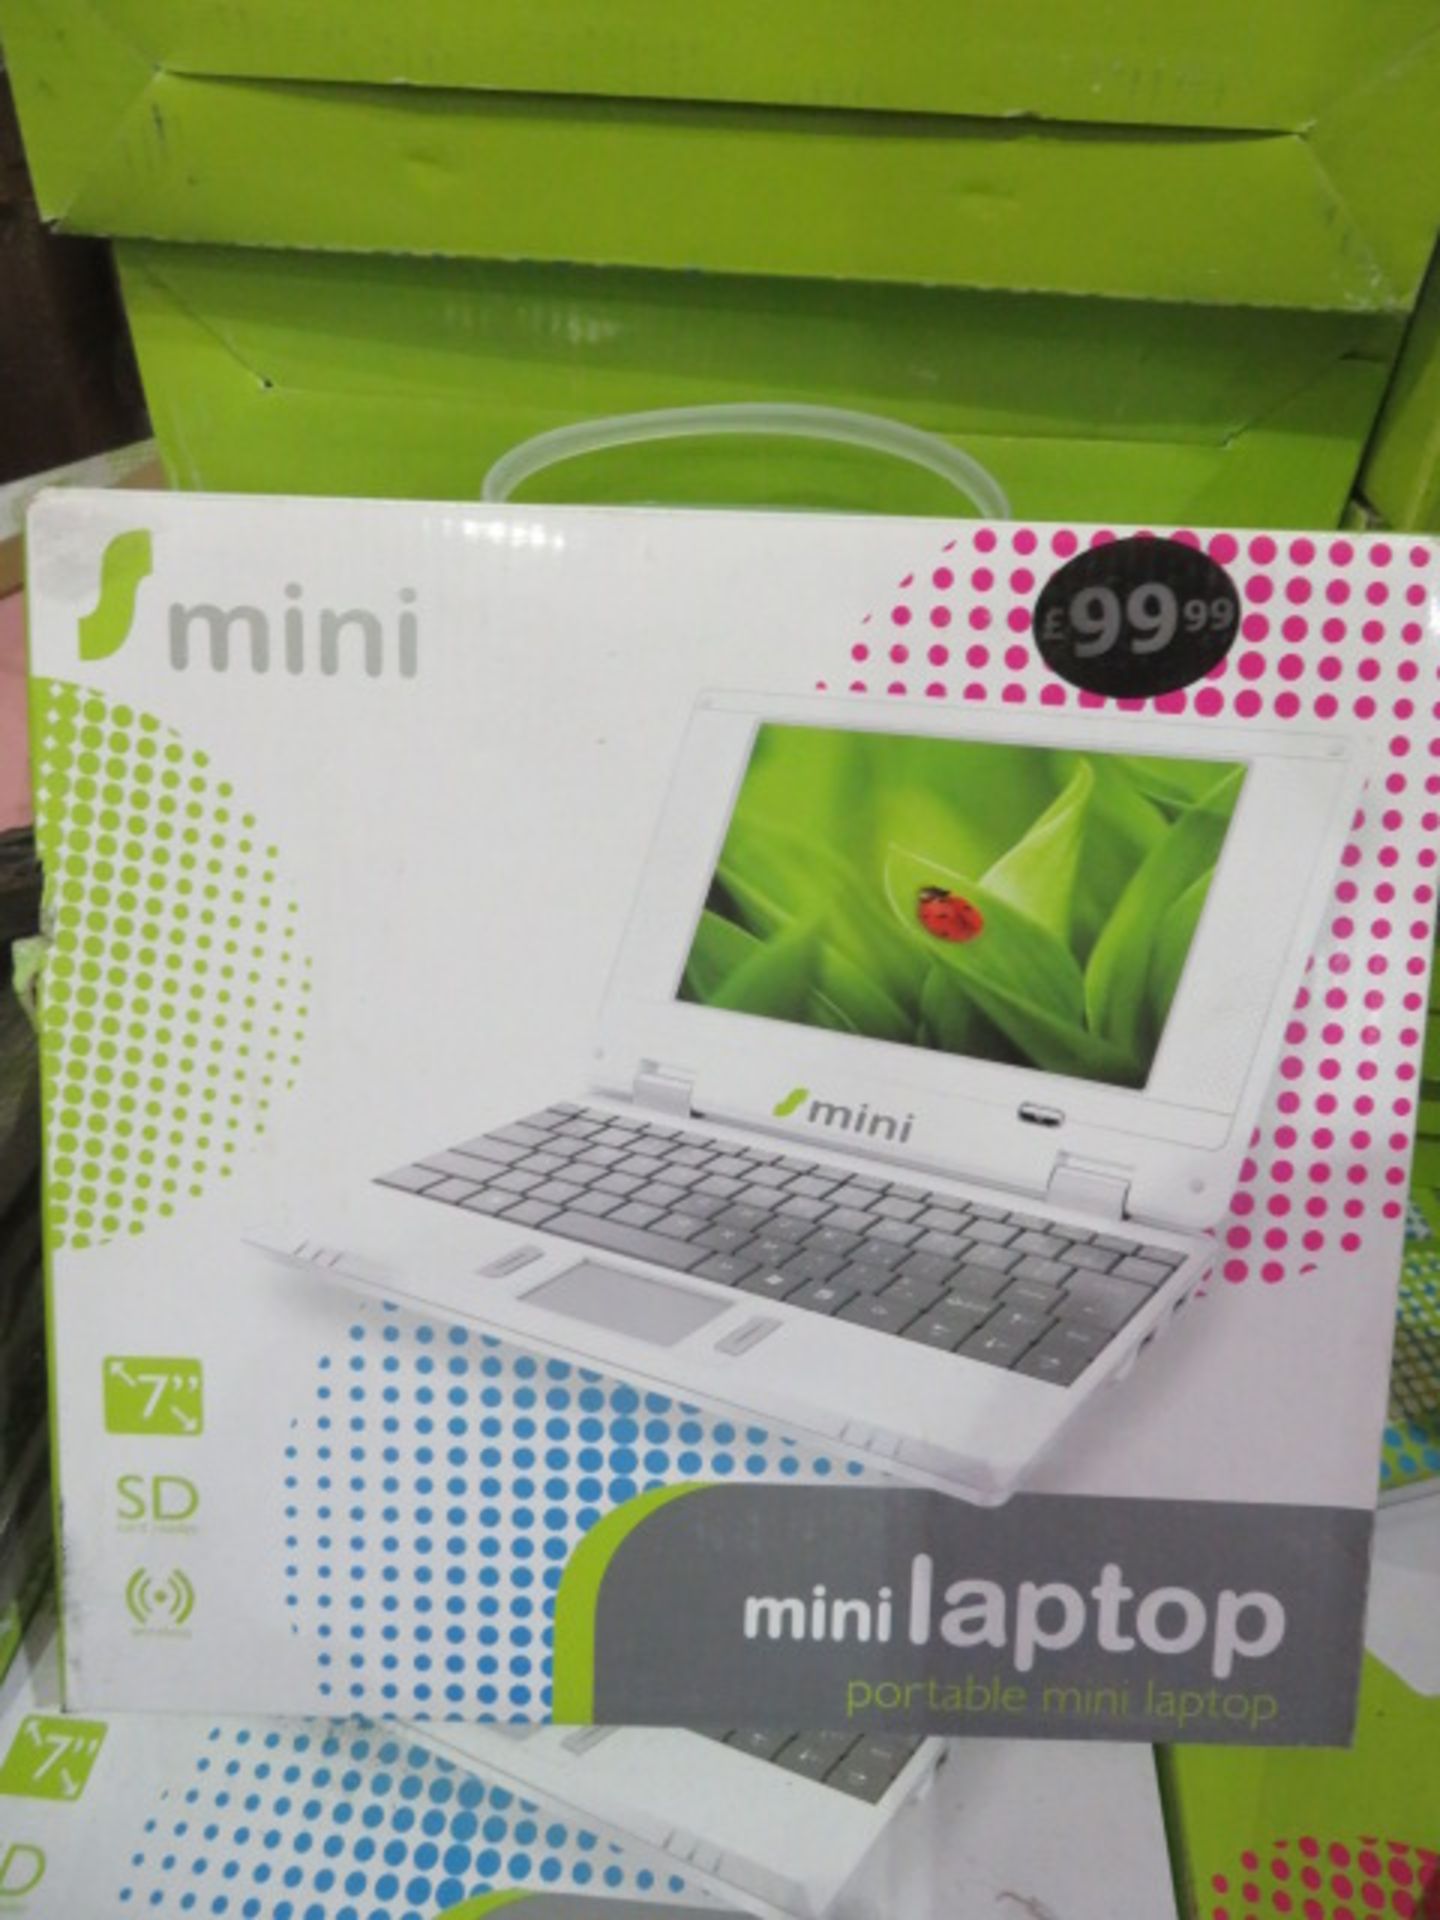 10 x S MINI - MINI PORTABLE LAPTOP - 7 INCH - SD CAR READER - WIRELESS. PRICED AT £99.99 EACH. NOTE: